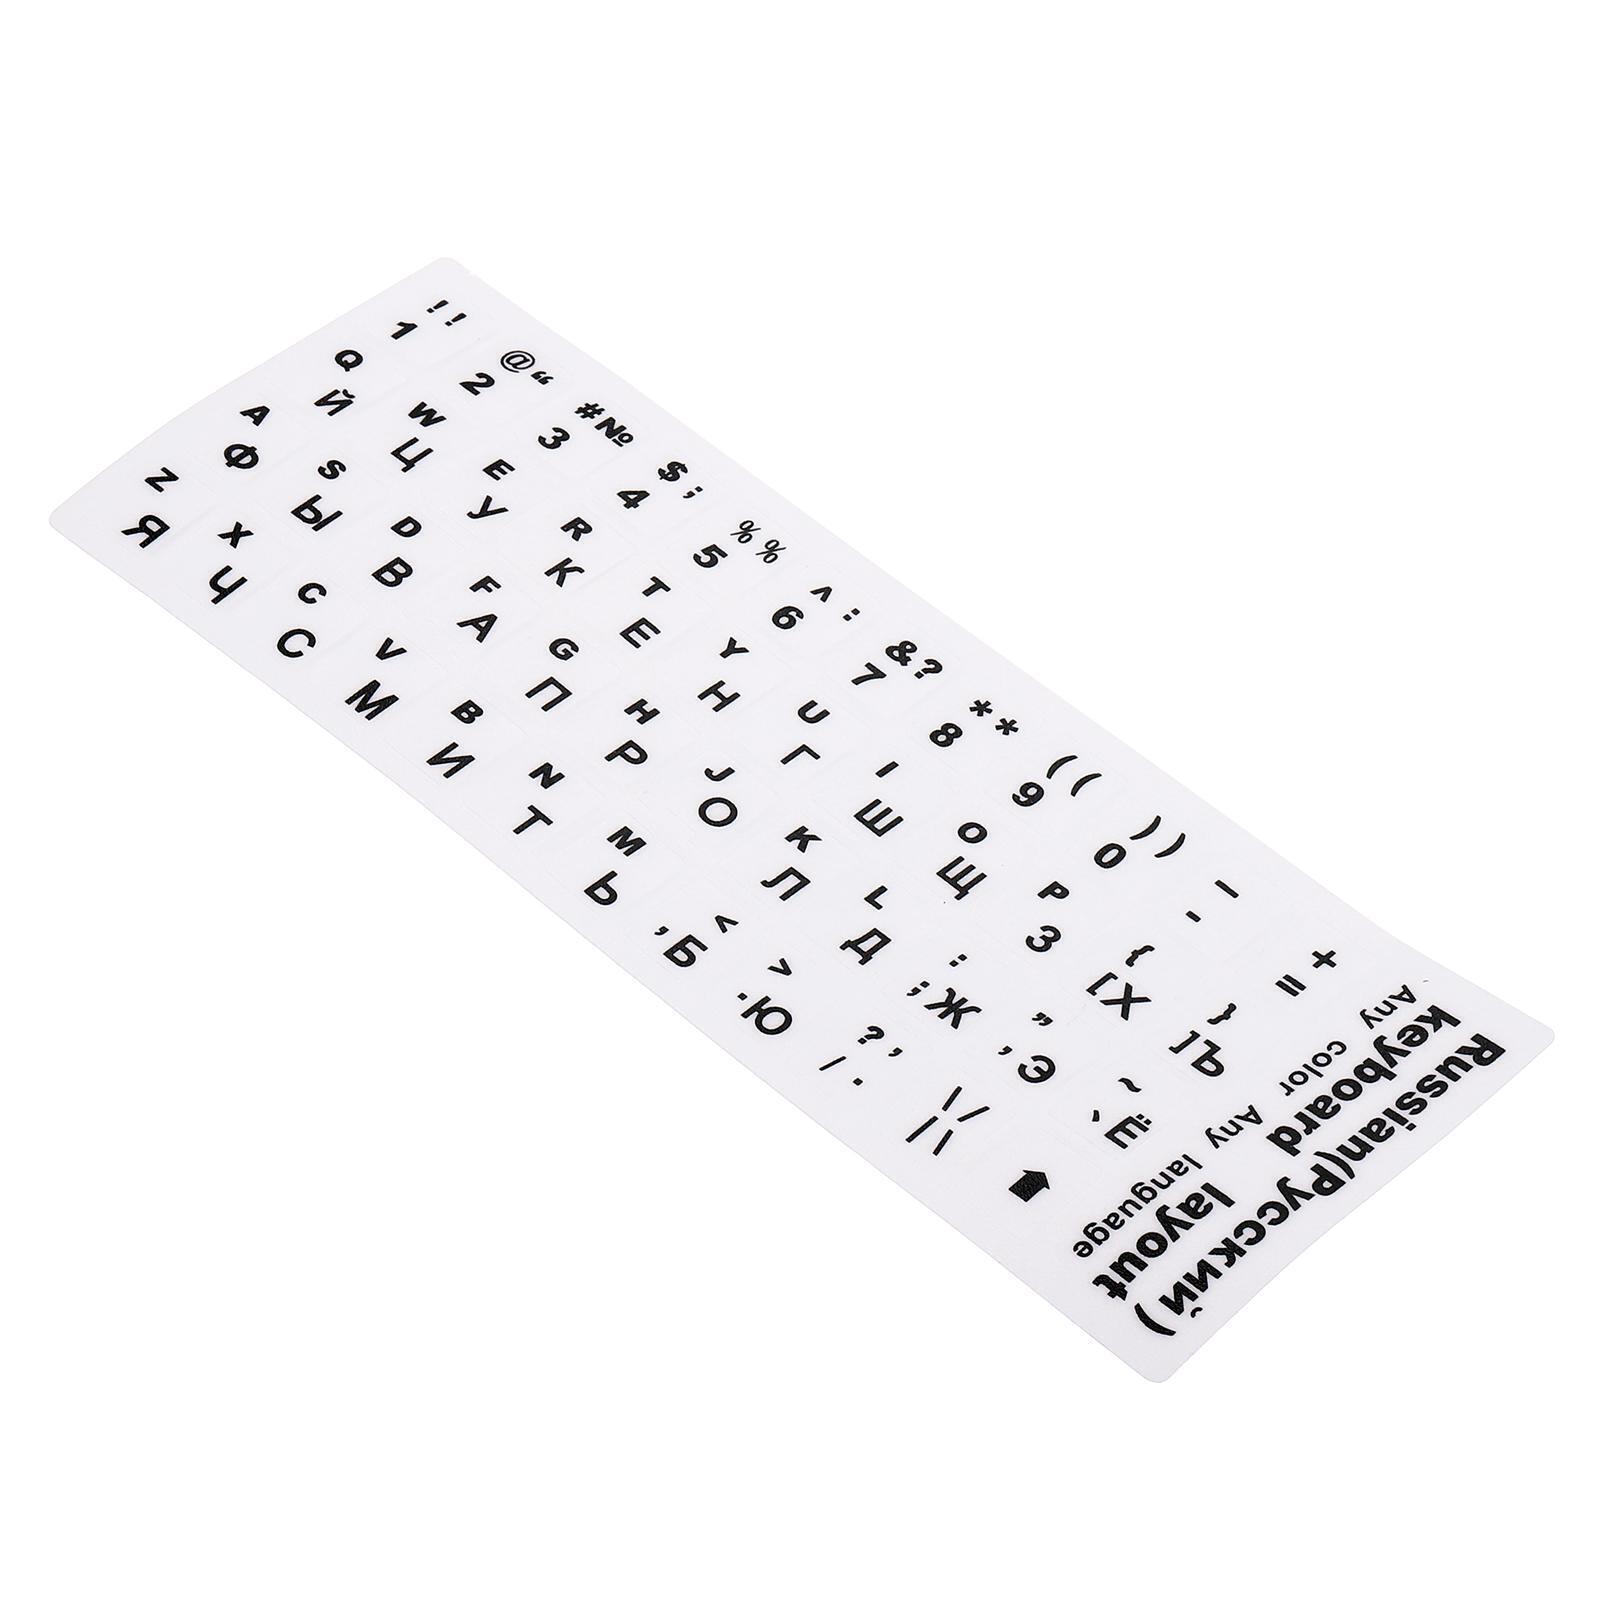 Russian Keyboard Stickers, 2Pcs Computer Cover White Background Black Lettering